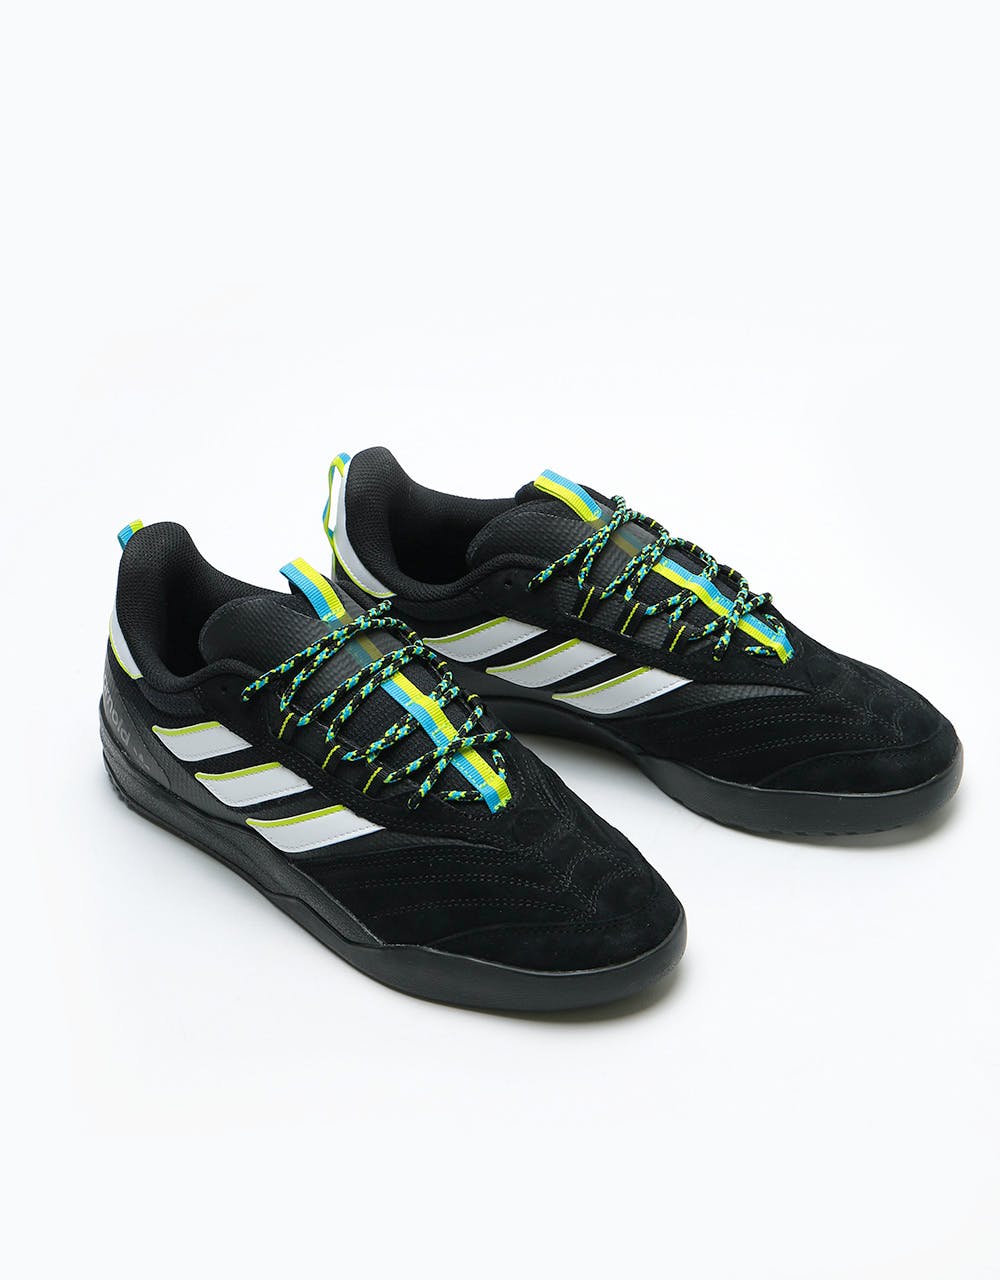 Adidas x Mike Arnold Copa Nationale Skate Shoes - Black/White/Custom